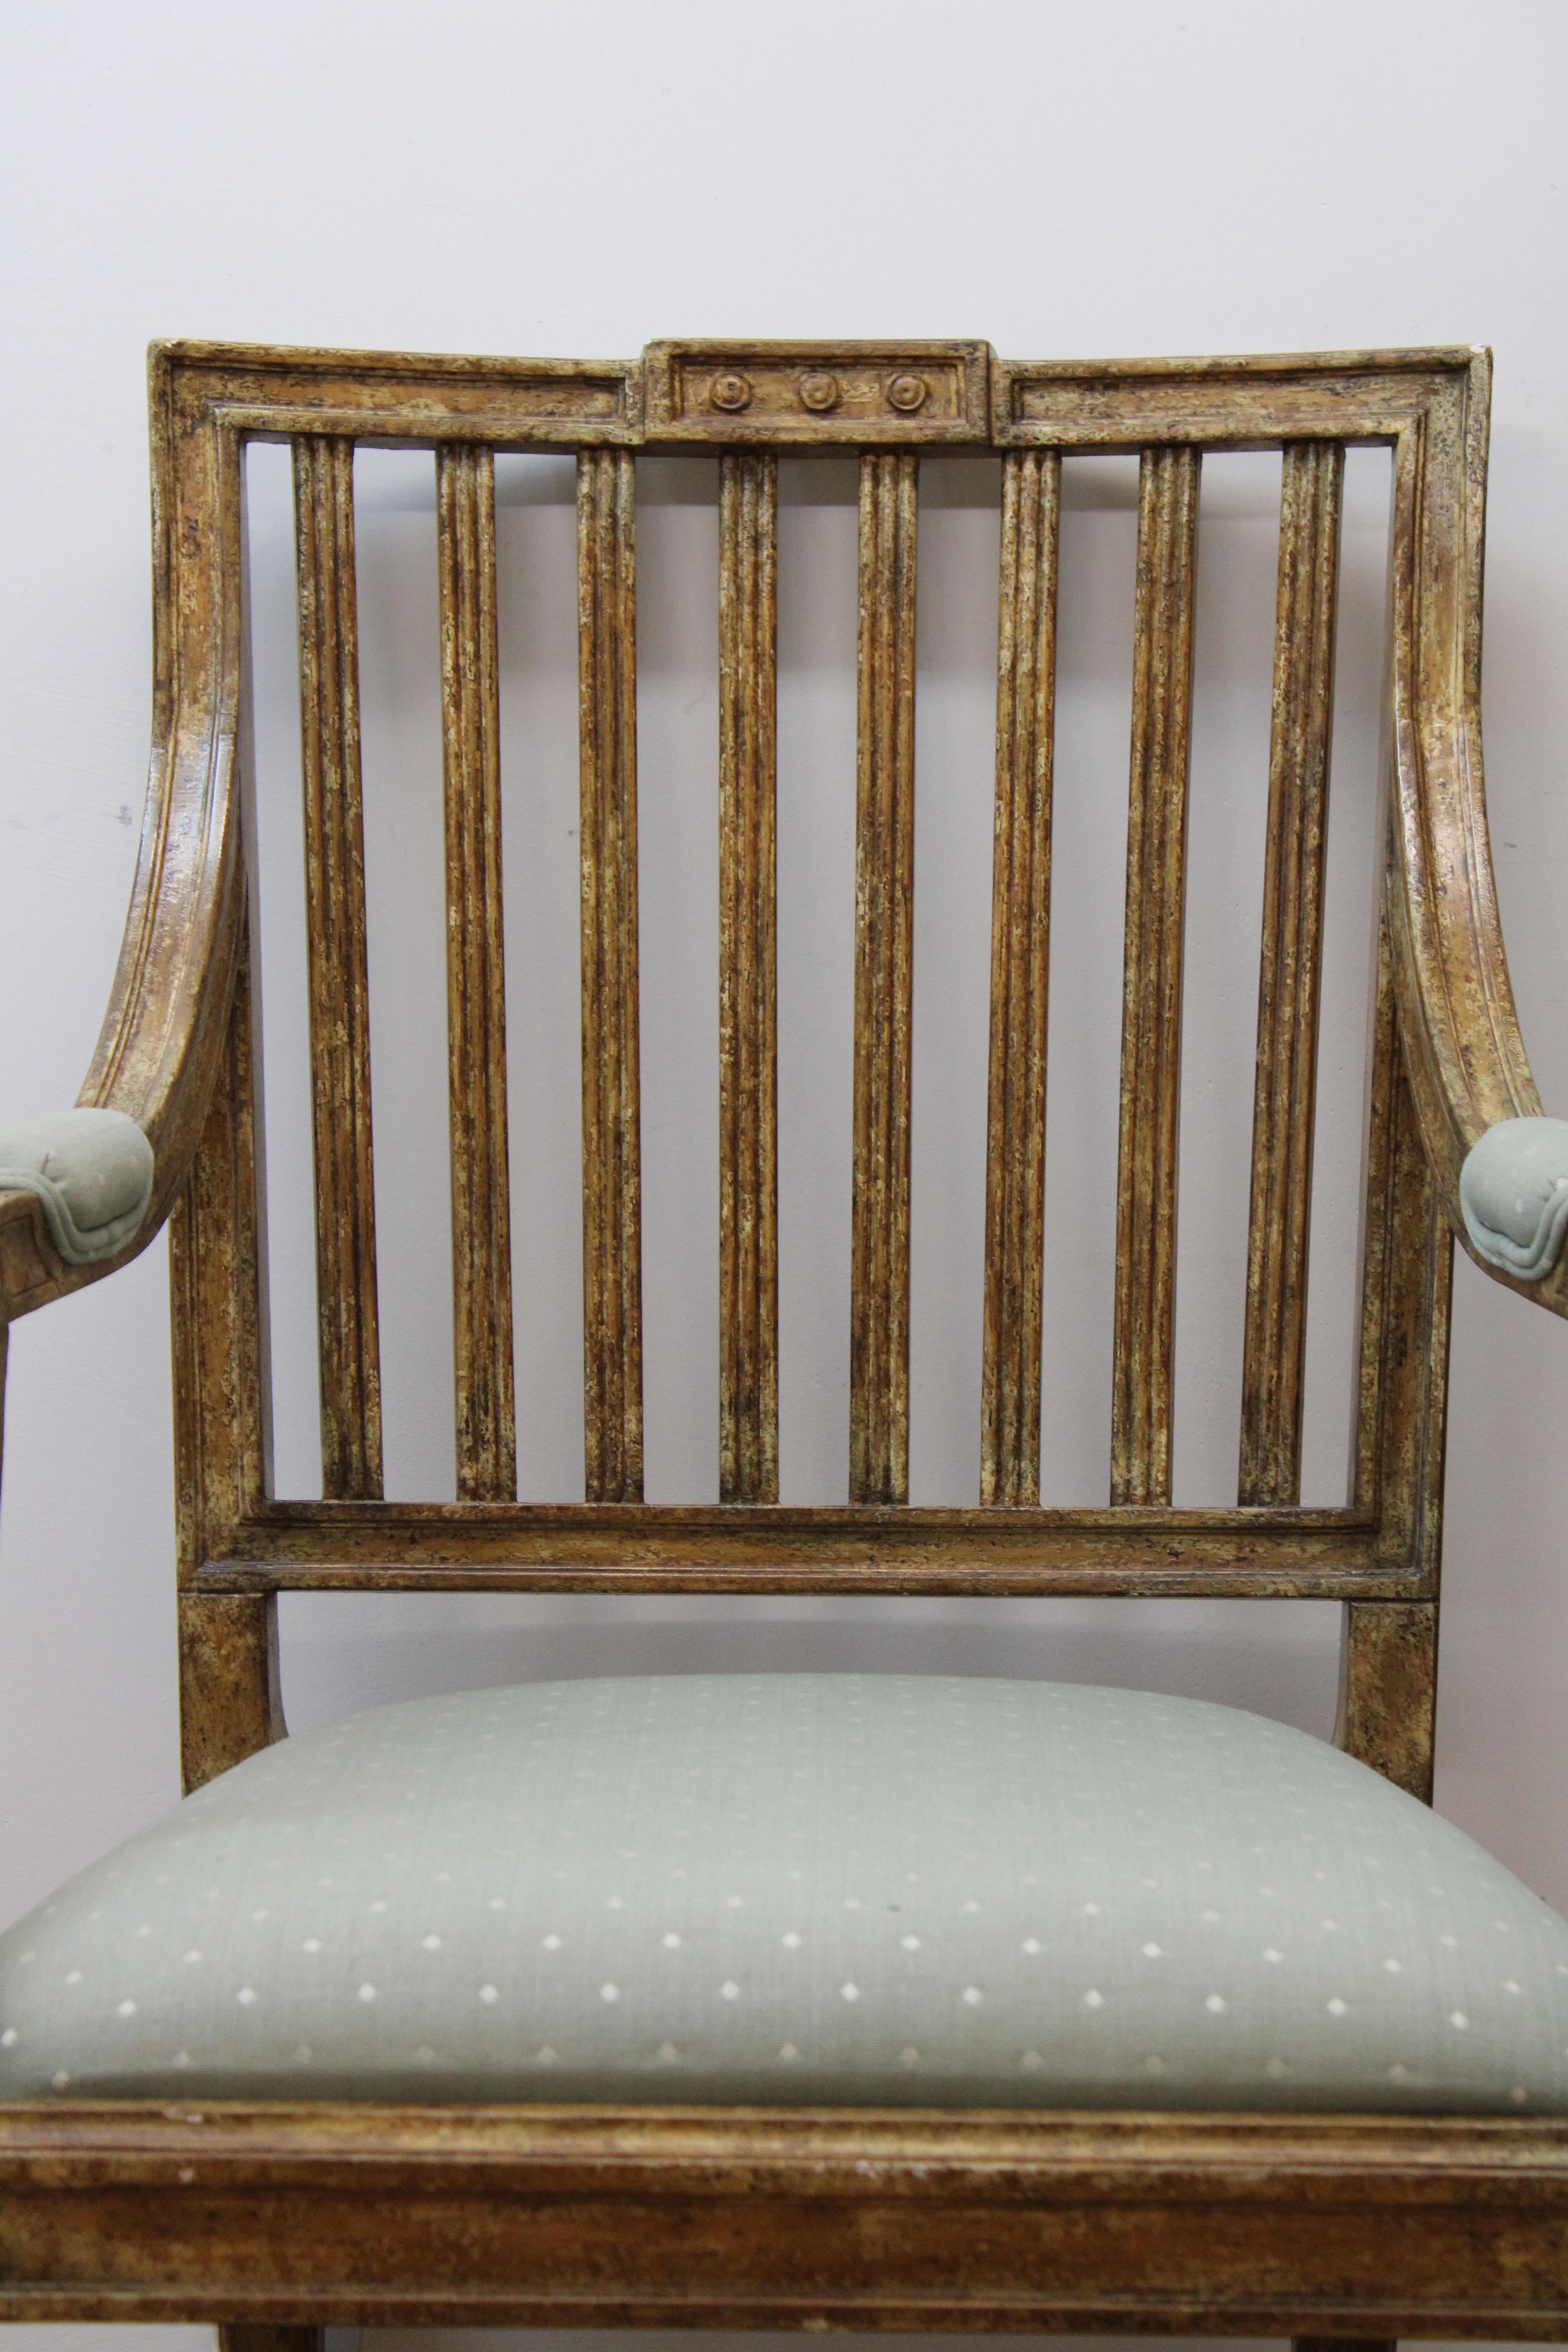 C. 20th Century

French Style Directories hand painted arm chair w/ cute polka-dots on seat.